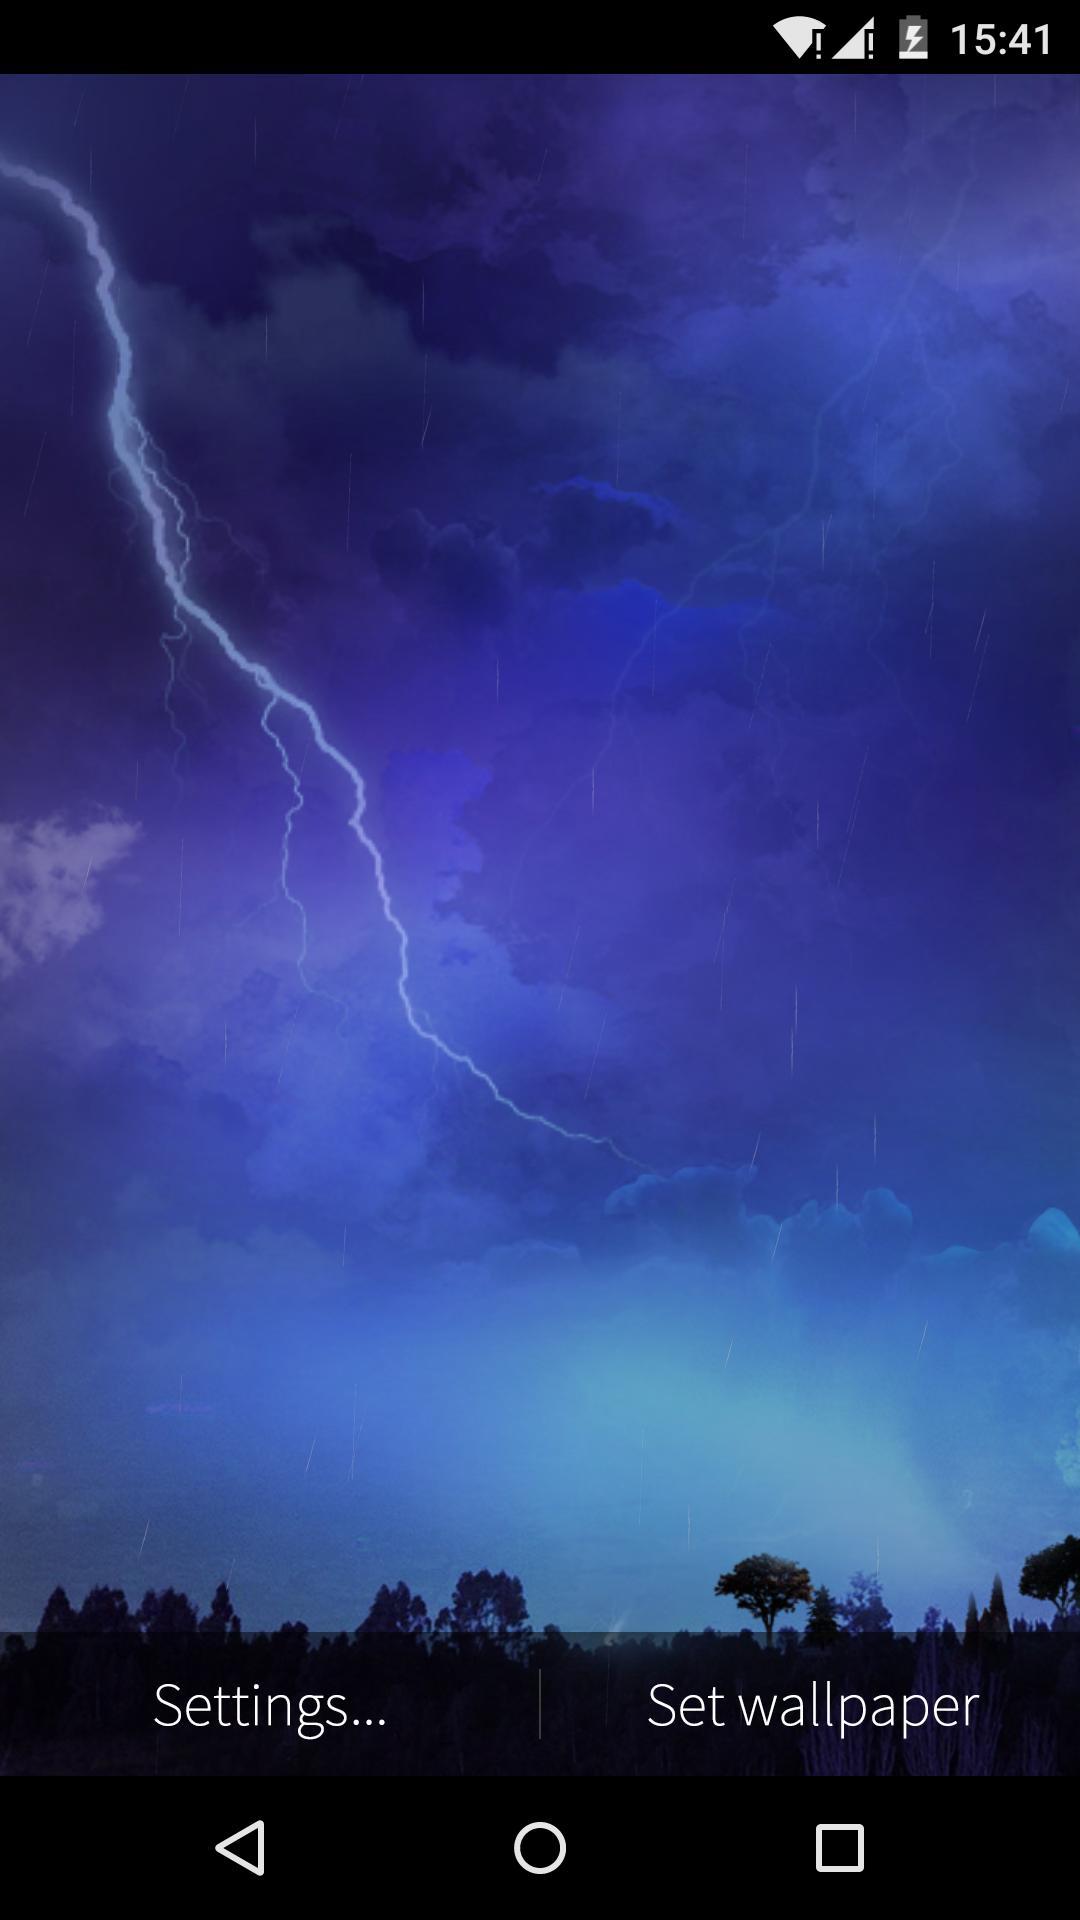 Download Storm Live Wallpaper In High Quality For Your 壁紙第五人格桌布紅蝶 1080x19 Wallpaper Teahub Io